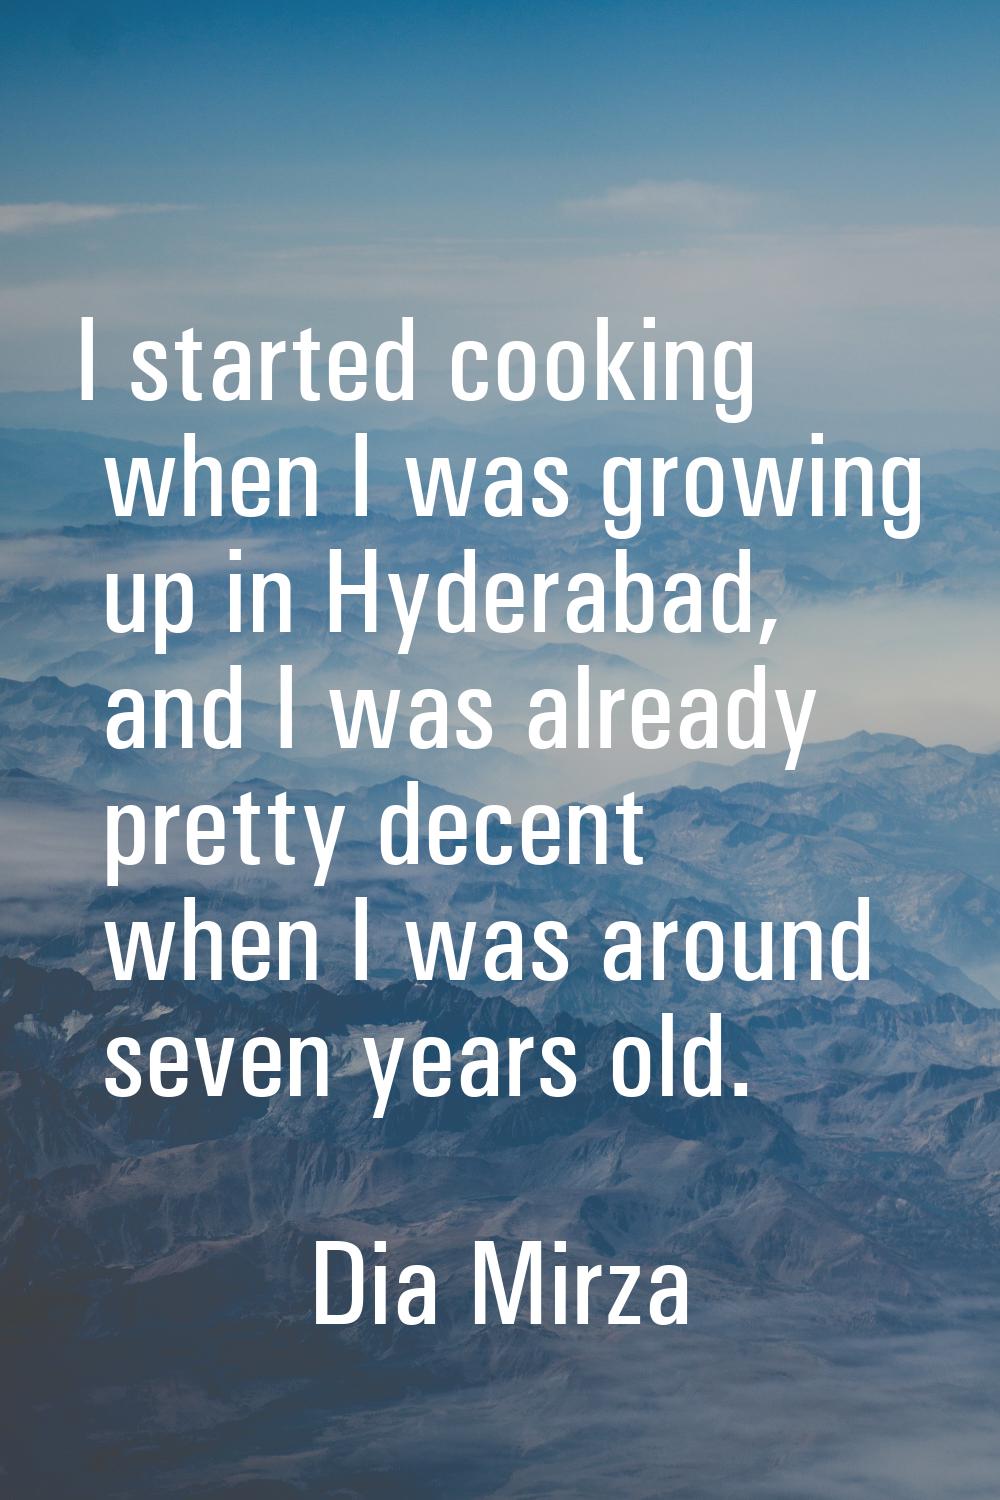 I started cooking when I was growing up in Hyderabad, and I was already pretty decent when I was ar